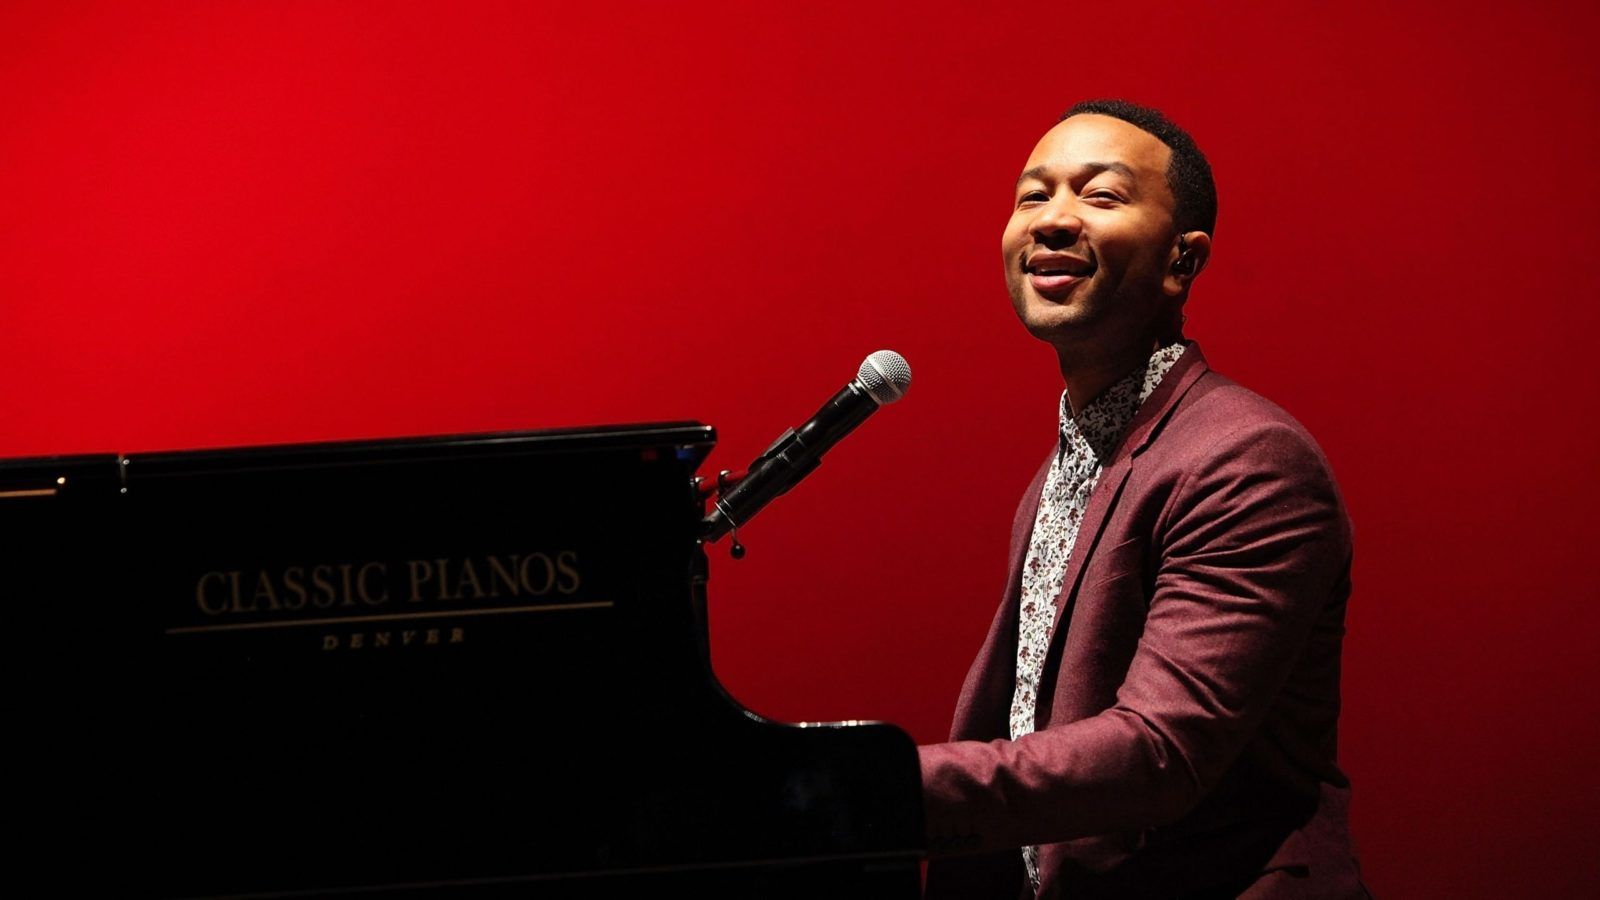 John Legend is launching his own skincare brand for melanin-rich complexions